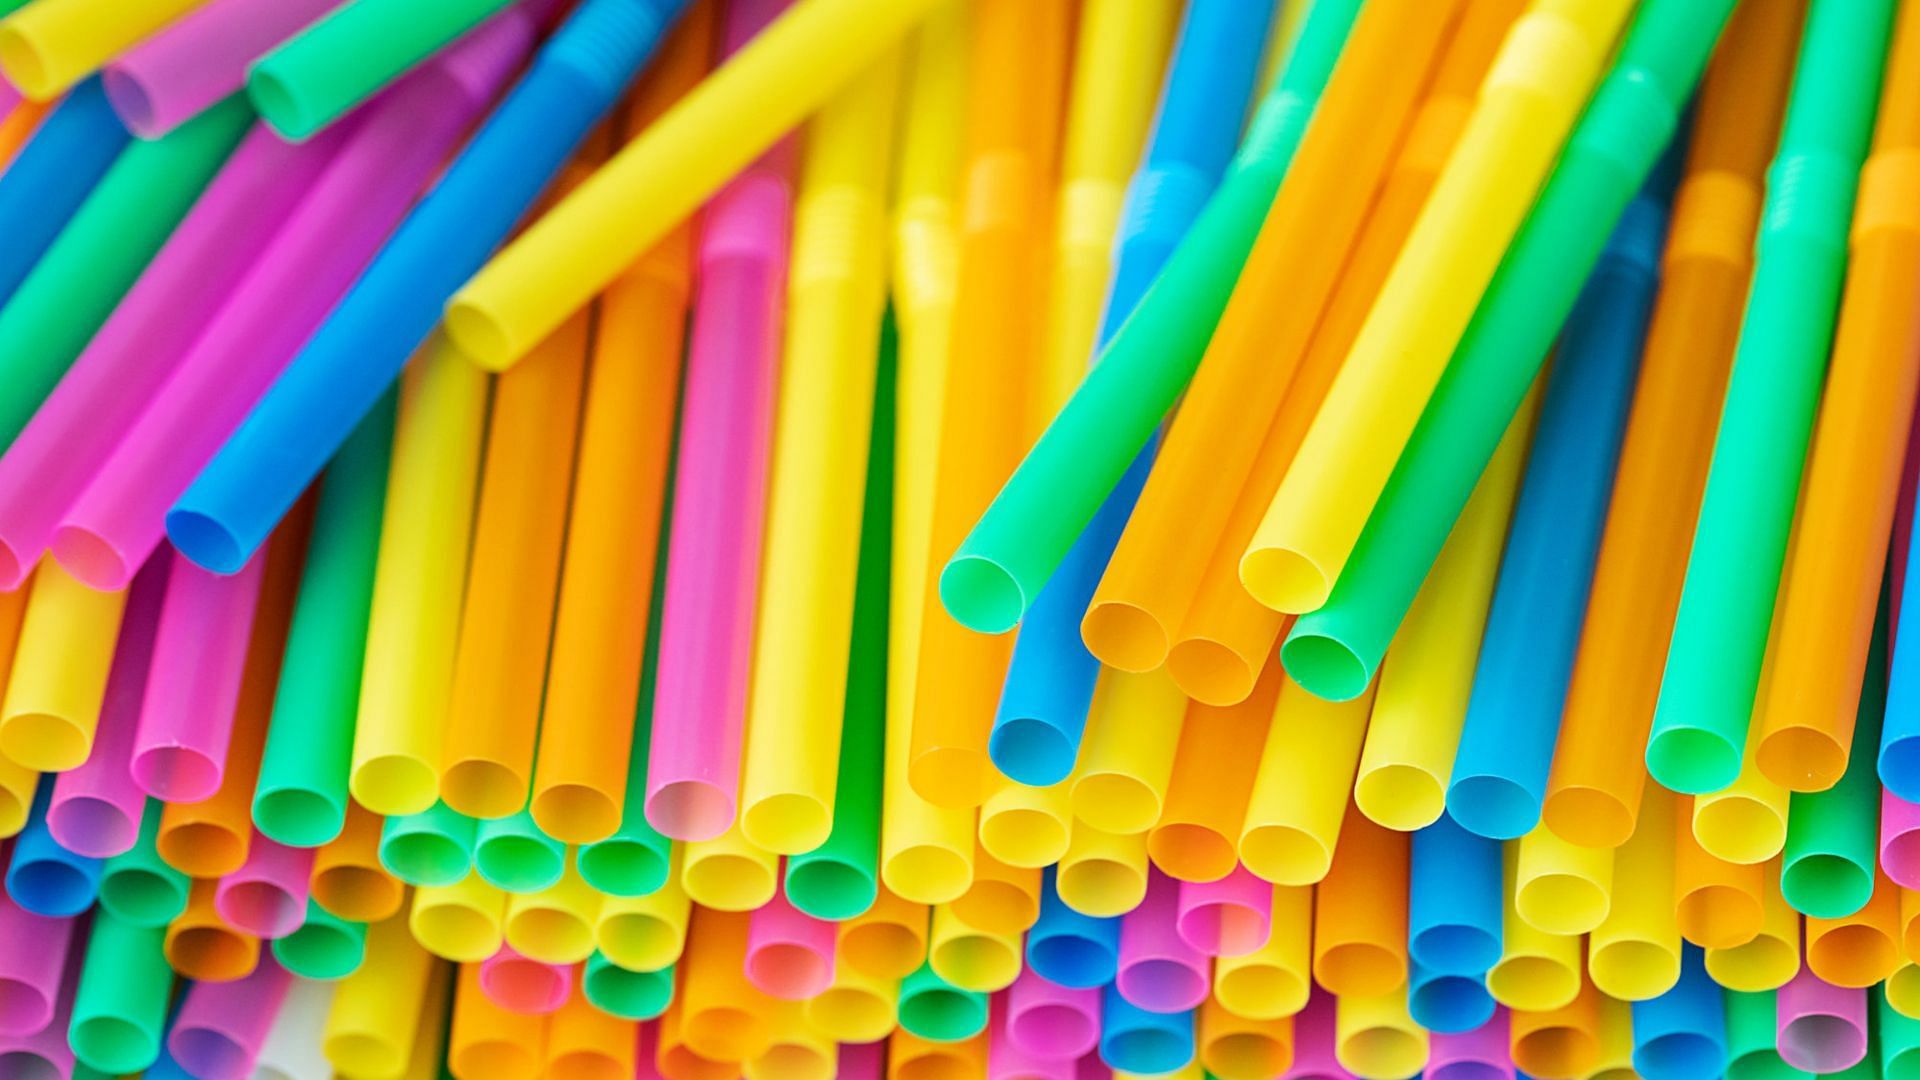 Single-use plastic straws make up for one of the highest concentration of fast food waste (Image via ShutterStock)